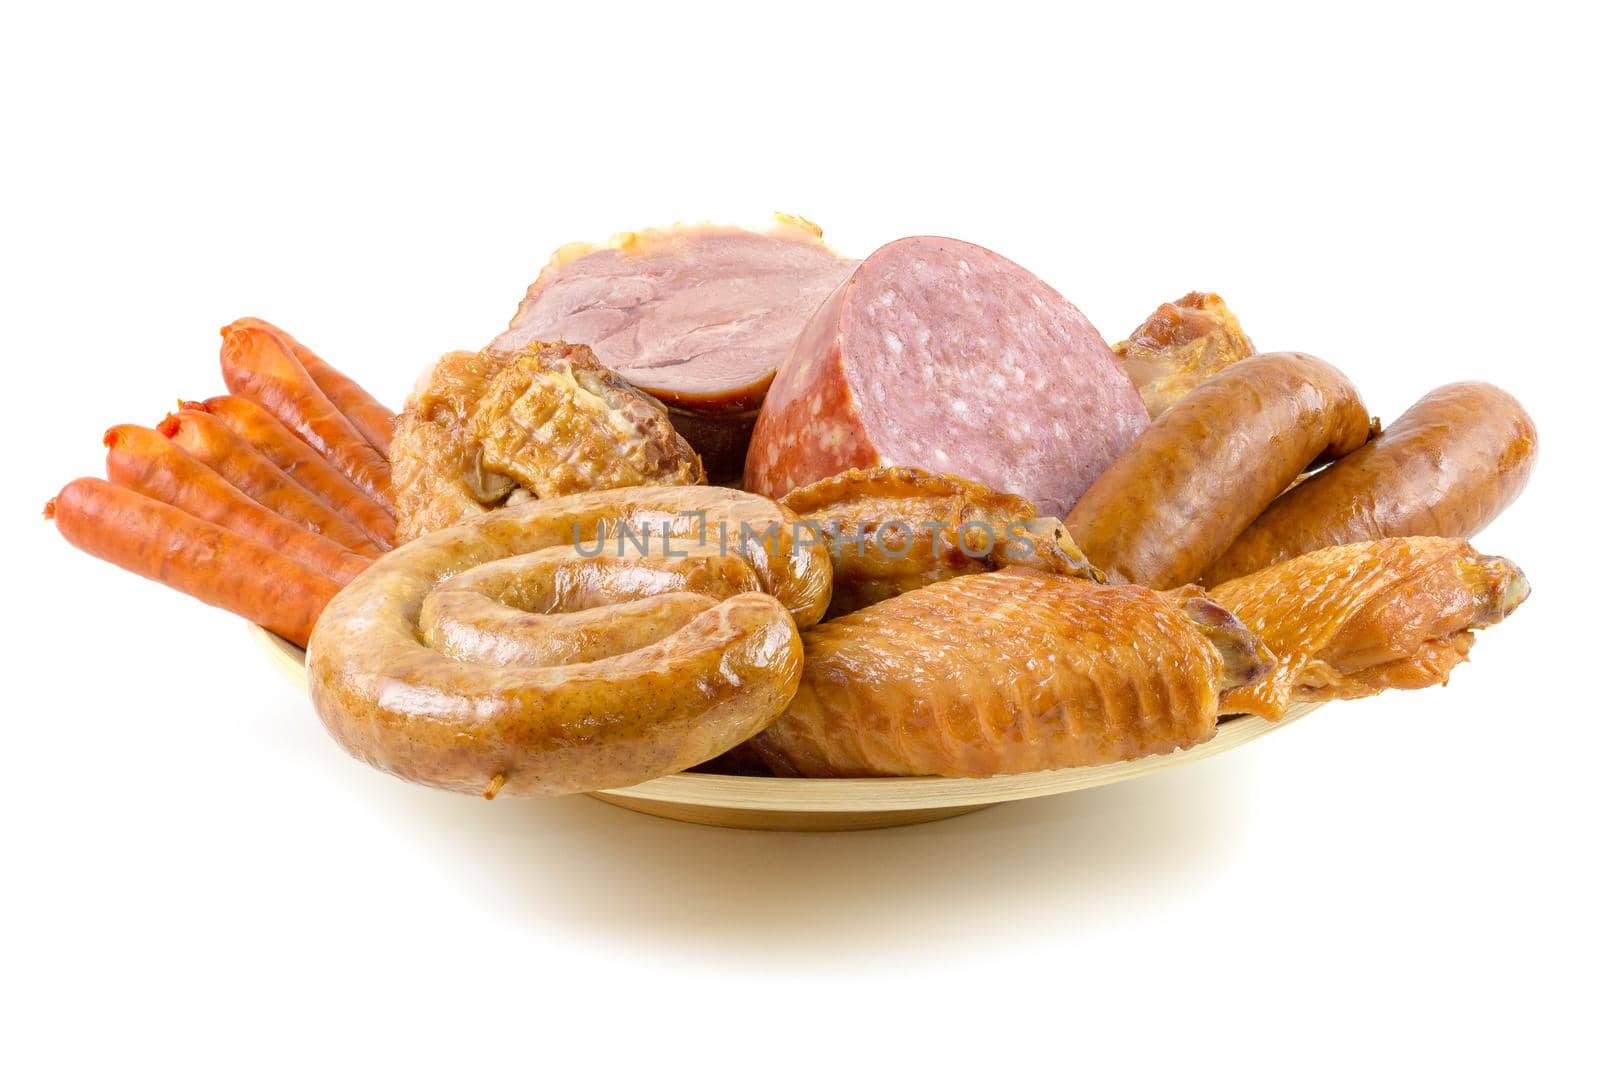 Assortment of sausages on a wooden plate on a white background. Smoked meat products.